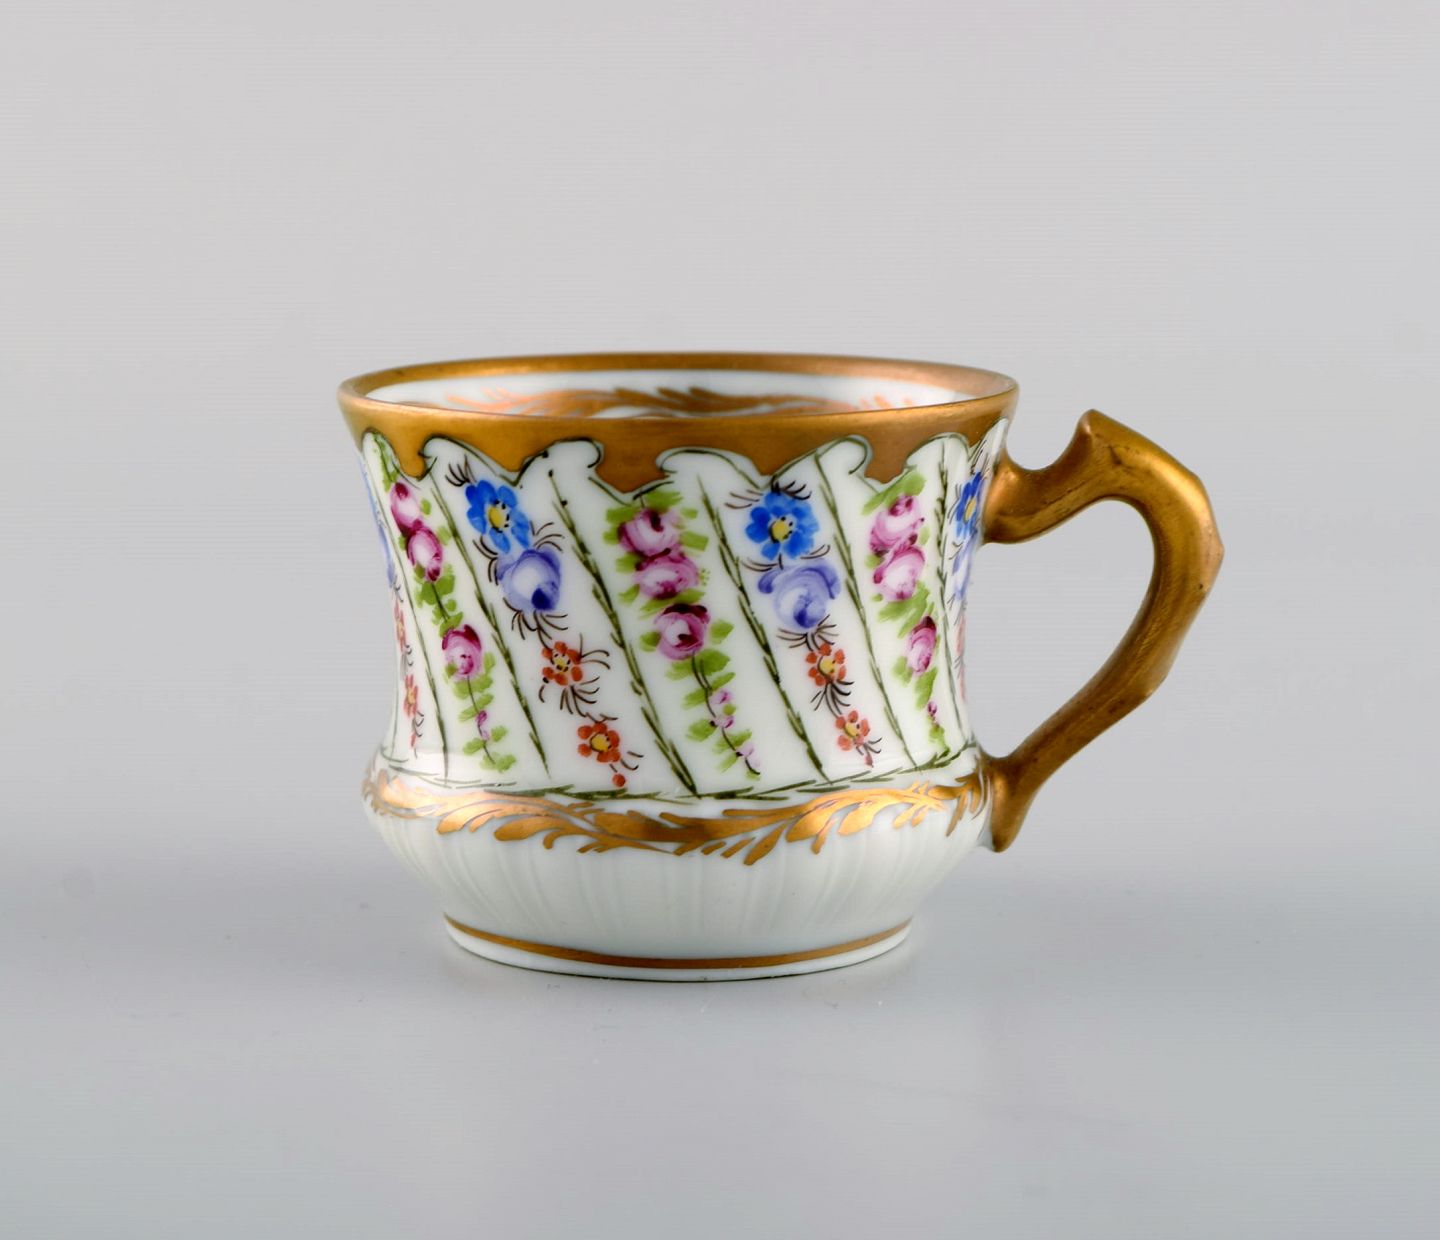  Limoges, France and Royal Doulton, England. Six